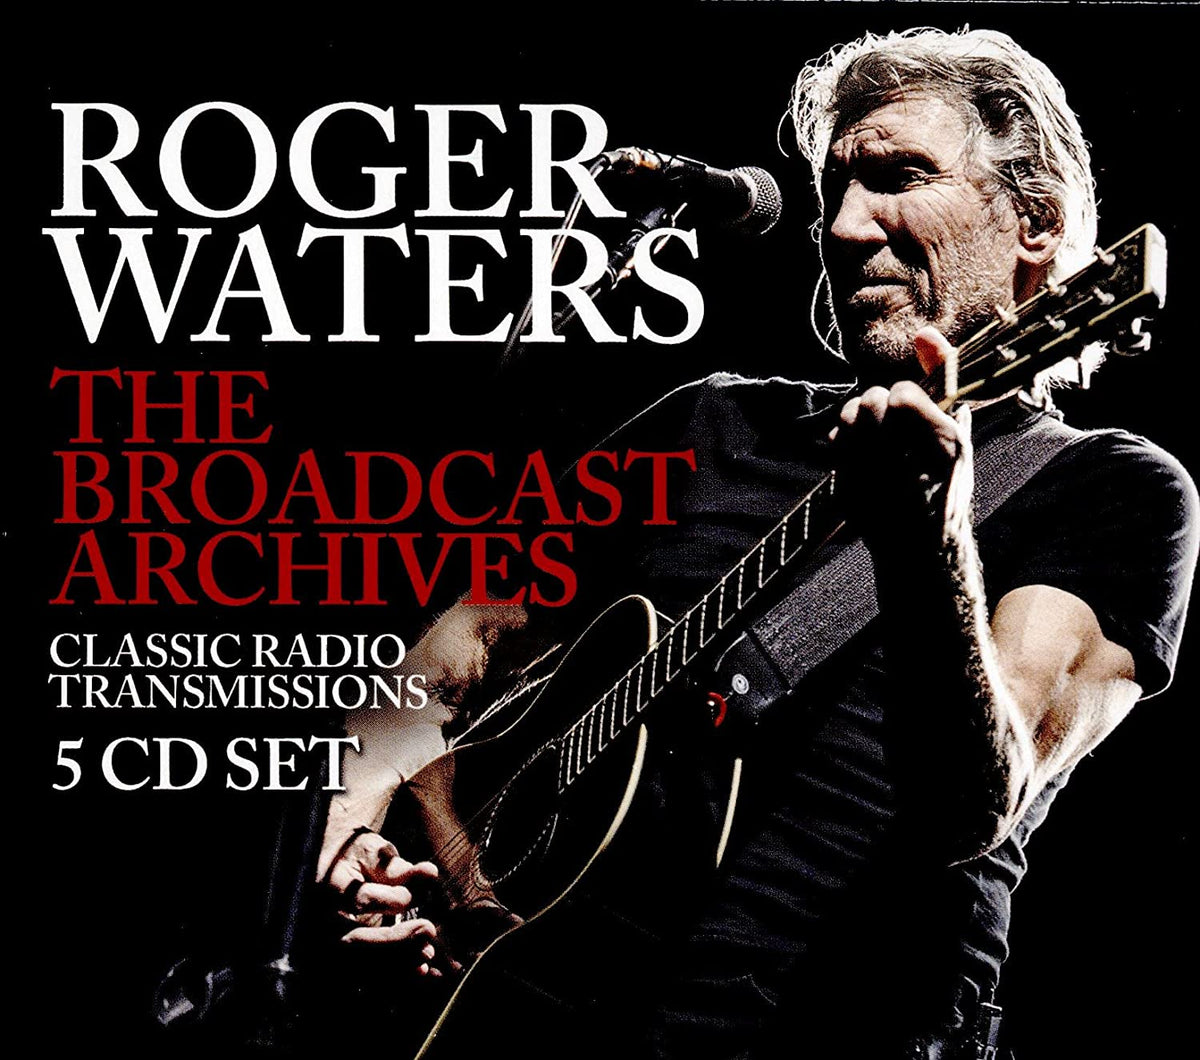 Roger Waters - The Broadcast Archives - 5 CD Box set